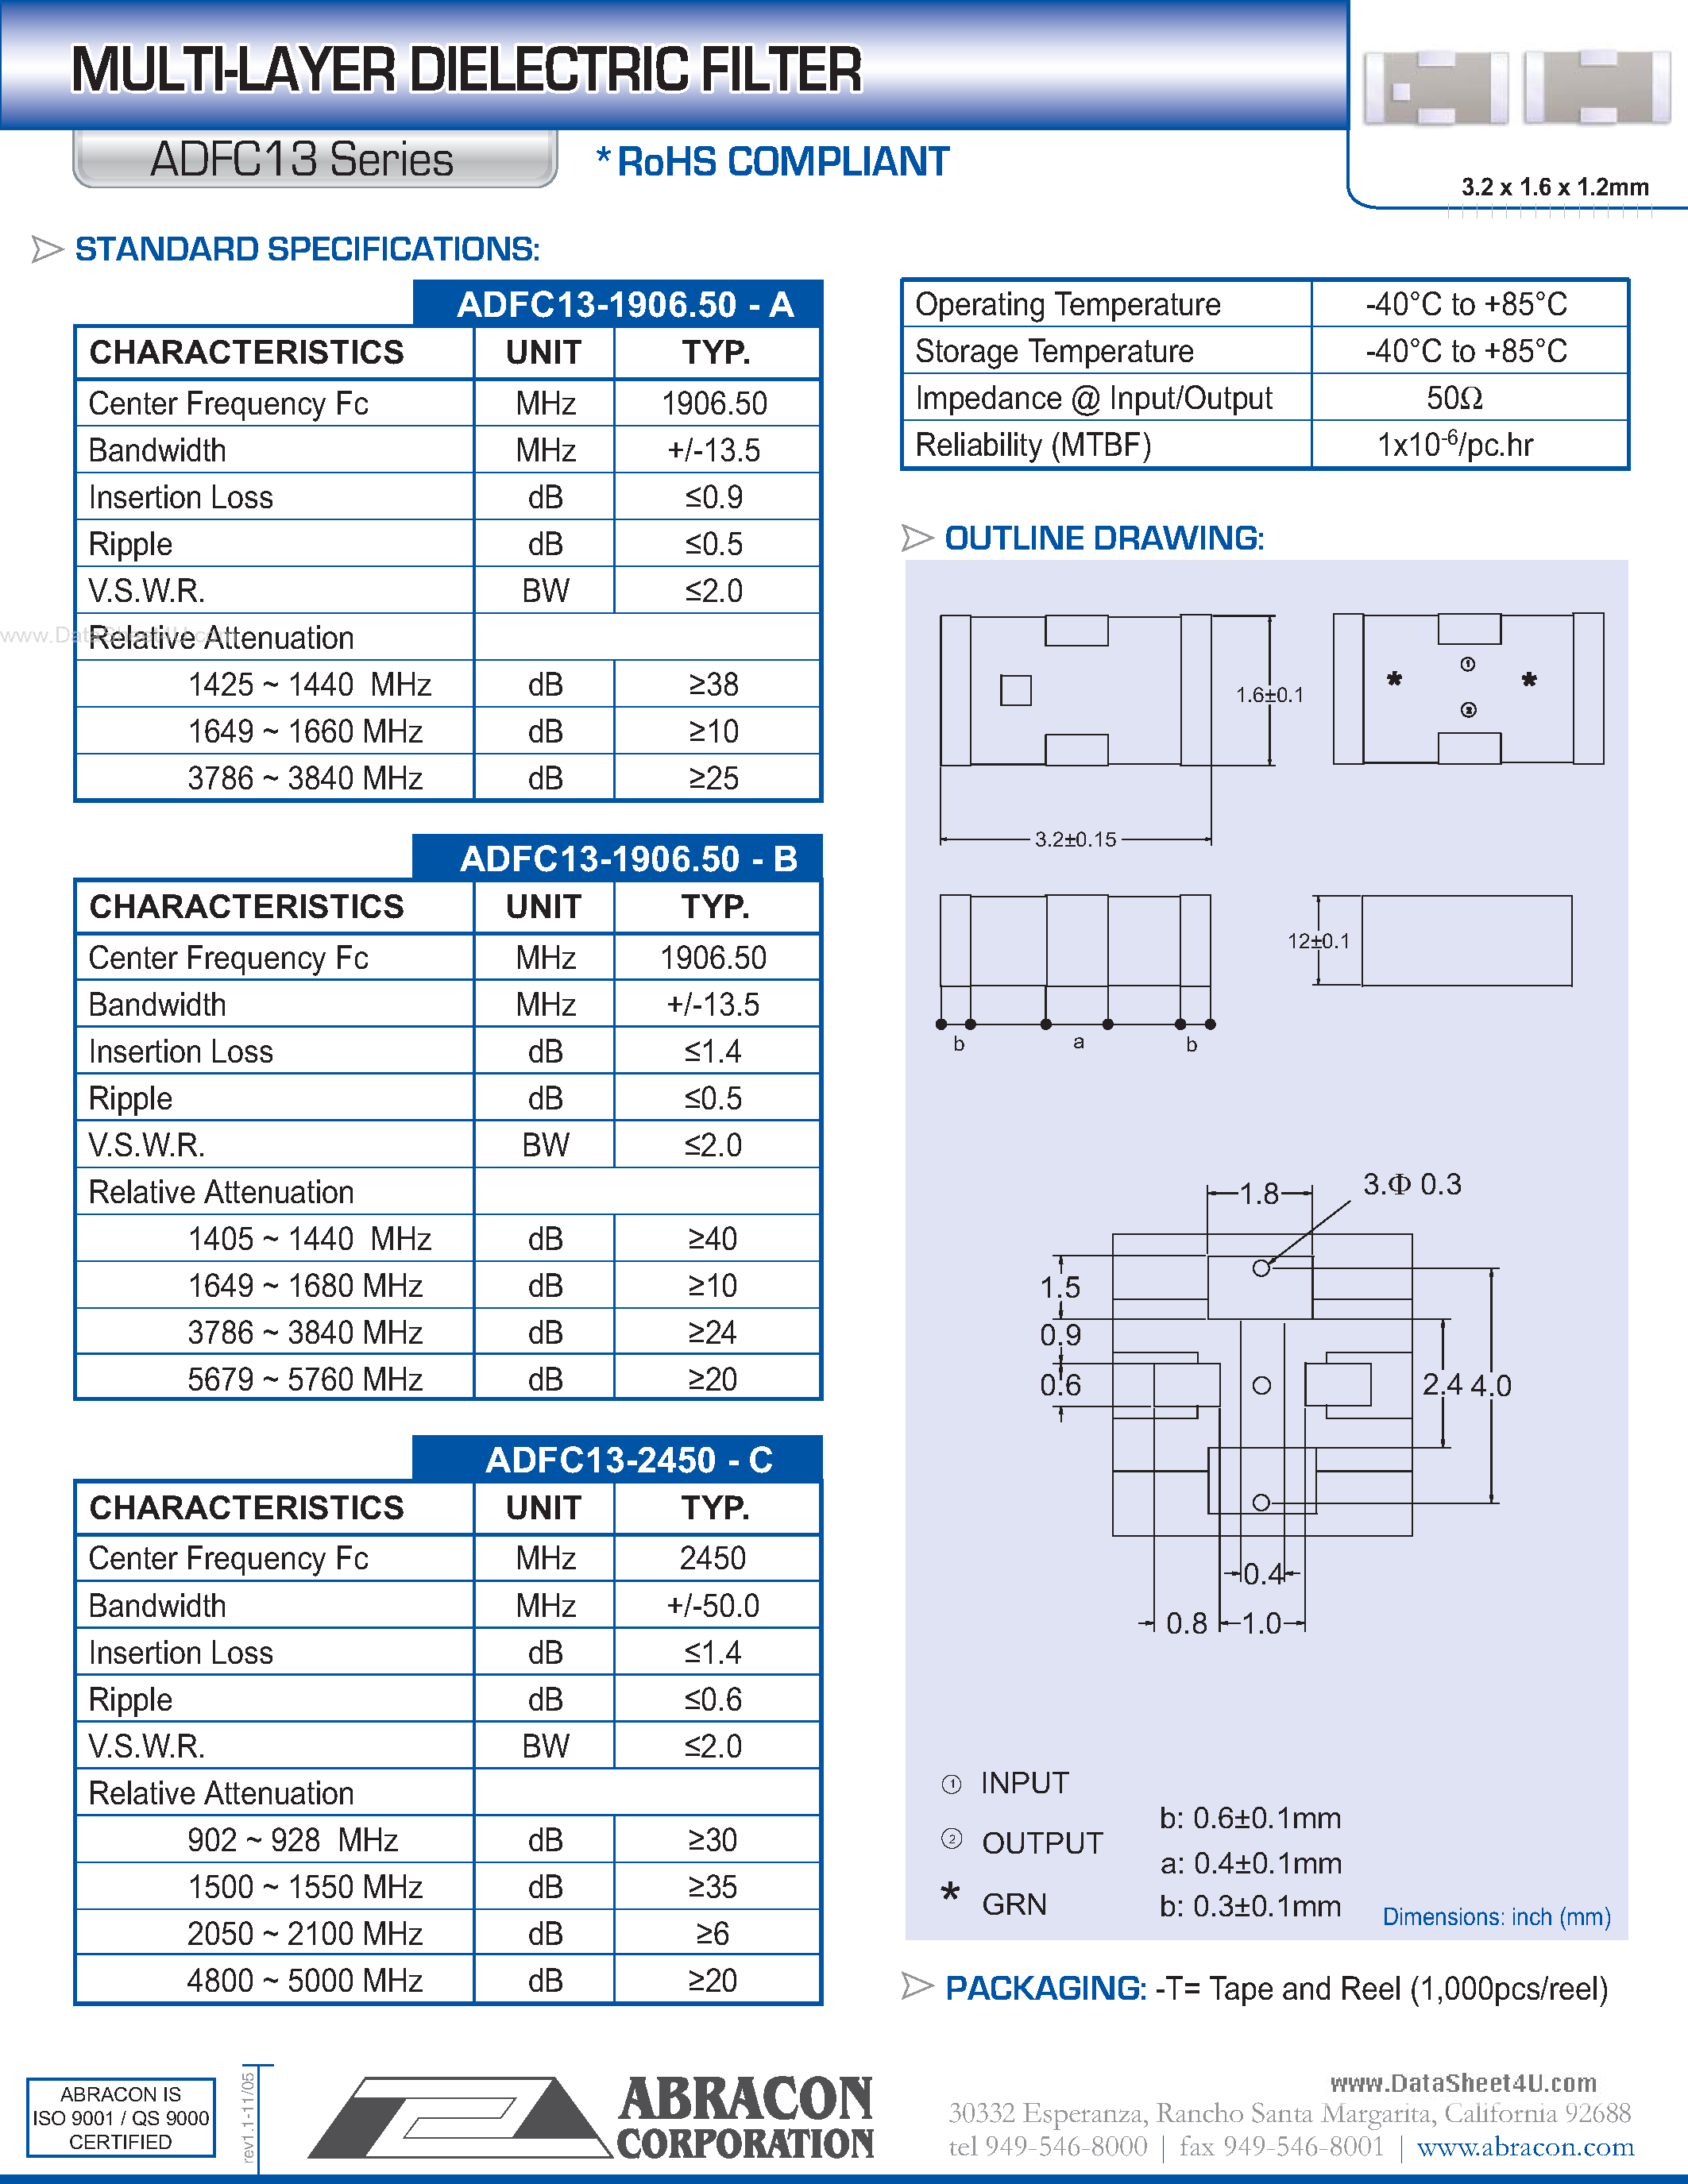 Datasheet ADFC13 - MULTI-LAYER DIELECTRIC FILTER page 1